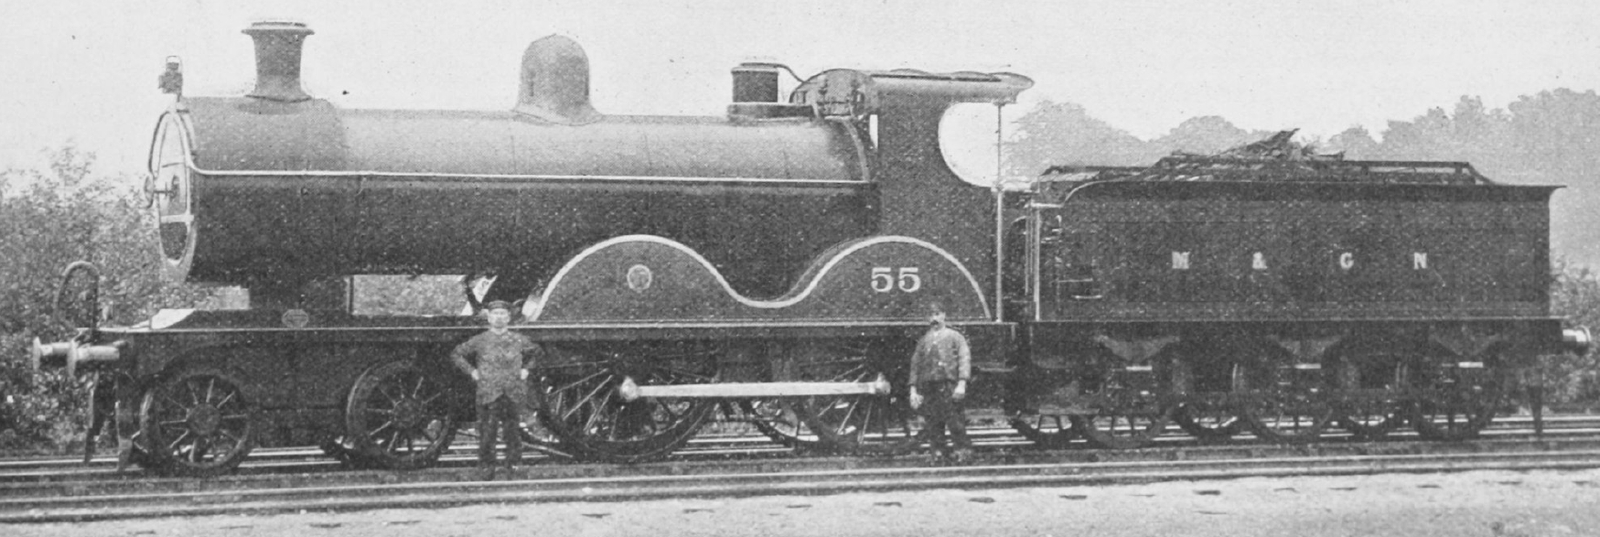 No. 55 after the rebuild with a larger boiler with round-topped firebox